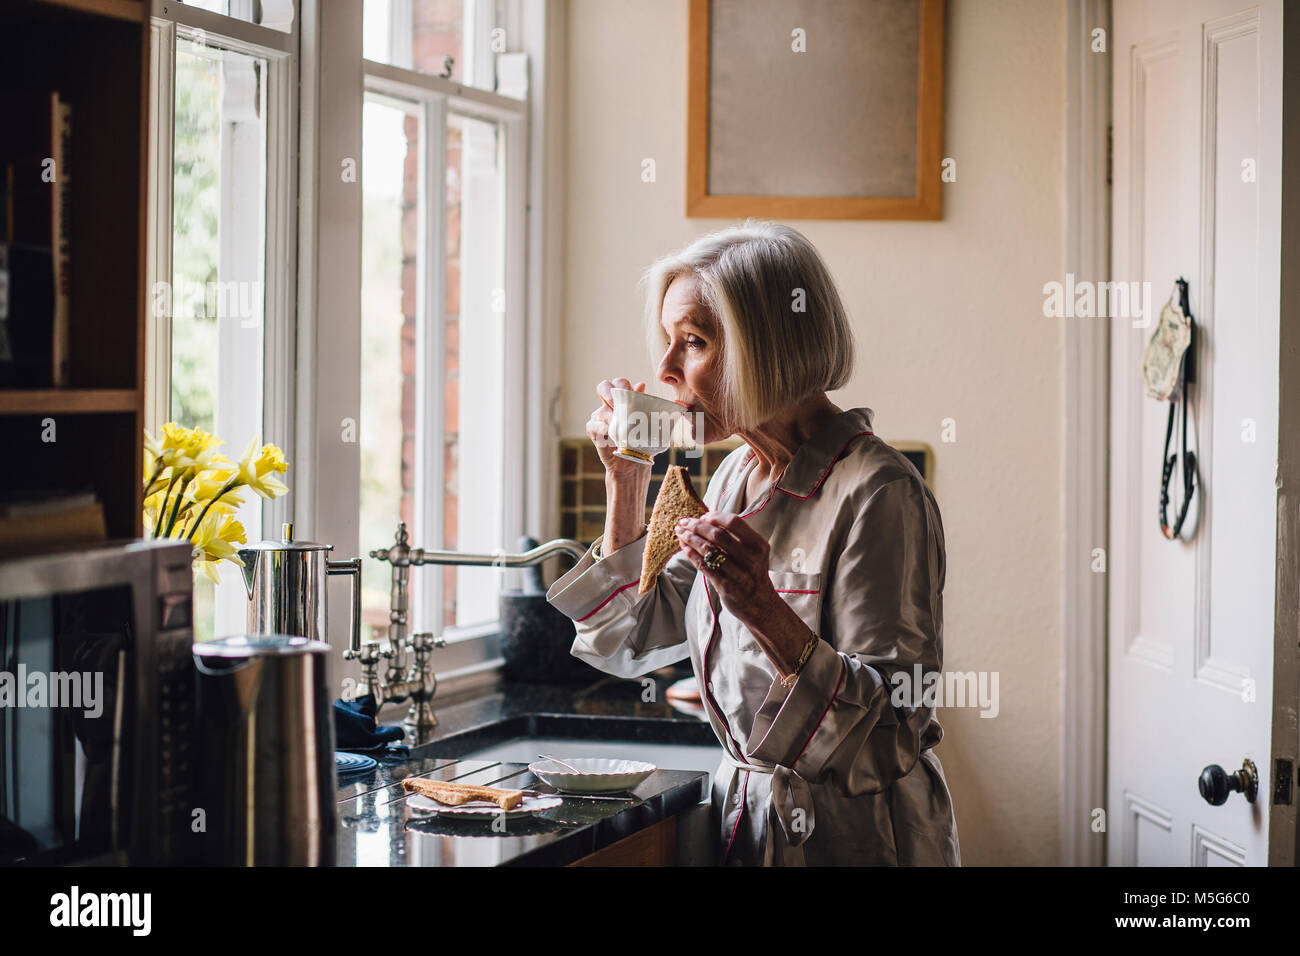 Senior woman is standing alone in her kitchen in her dressing gown, eating toast and dirnking tea. Stock Photo